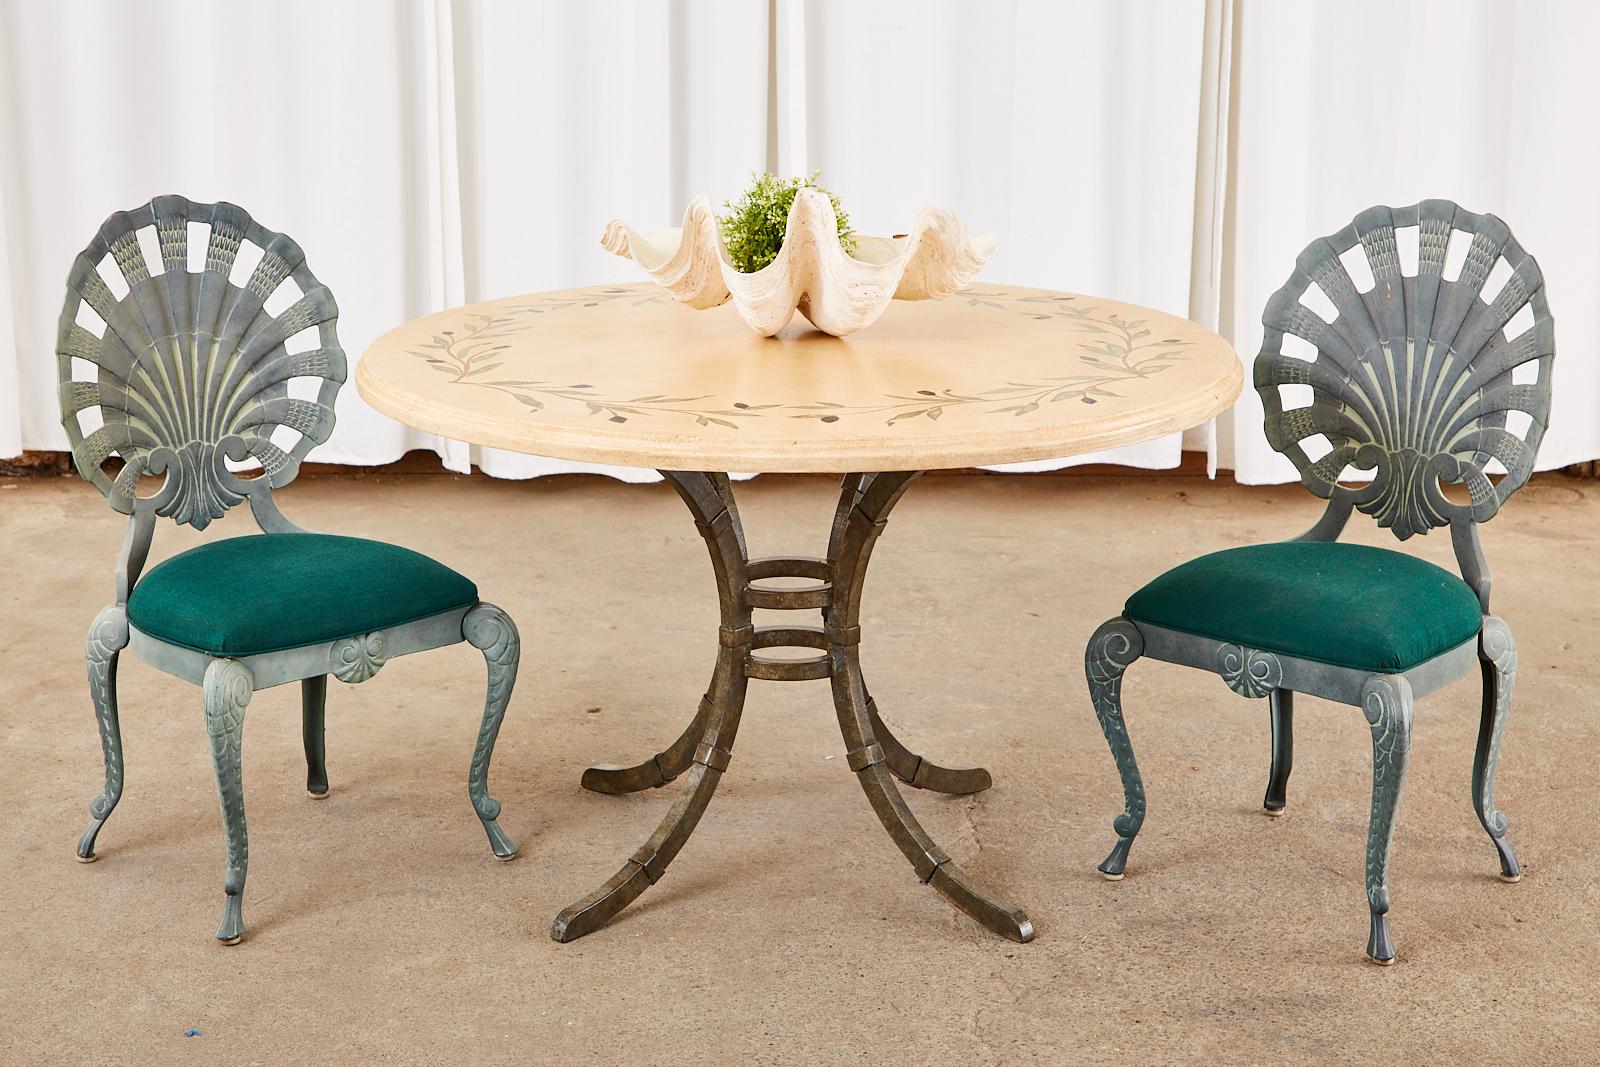 Country Italian style iron pedestal dining table or centre table featuring a thick glazed pottery ceramic top. The round top is decorated with a mosaic style olive branch design inlay around the border with a 1.5 inch thick ogee edge. Supported by a